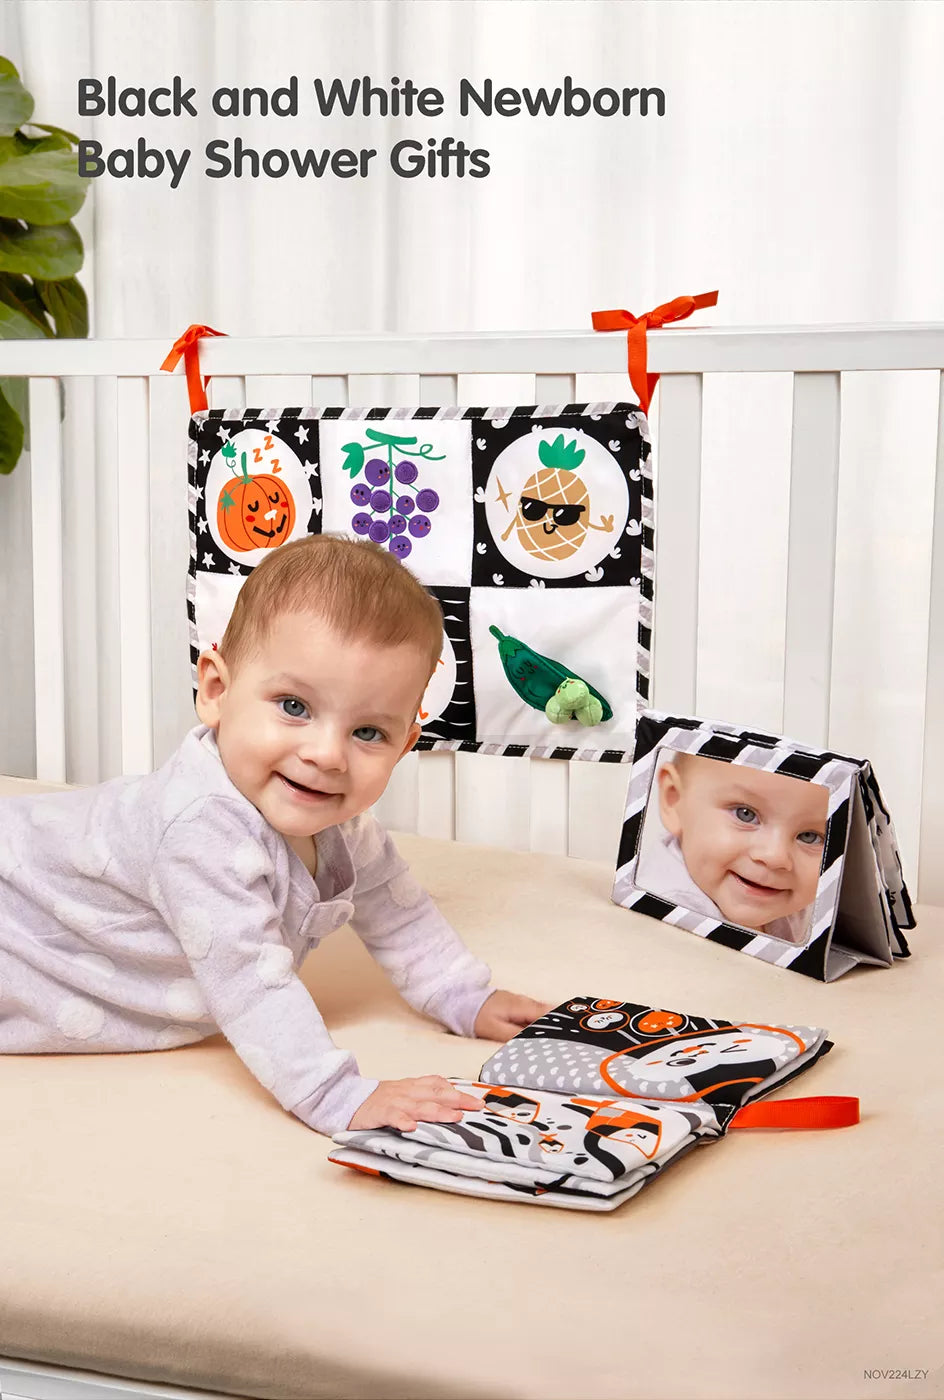 Black and white soft books with mirror for hands on play